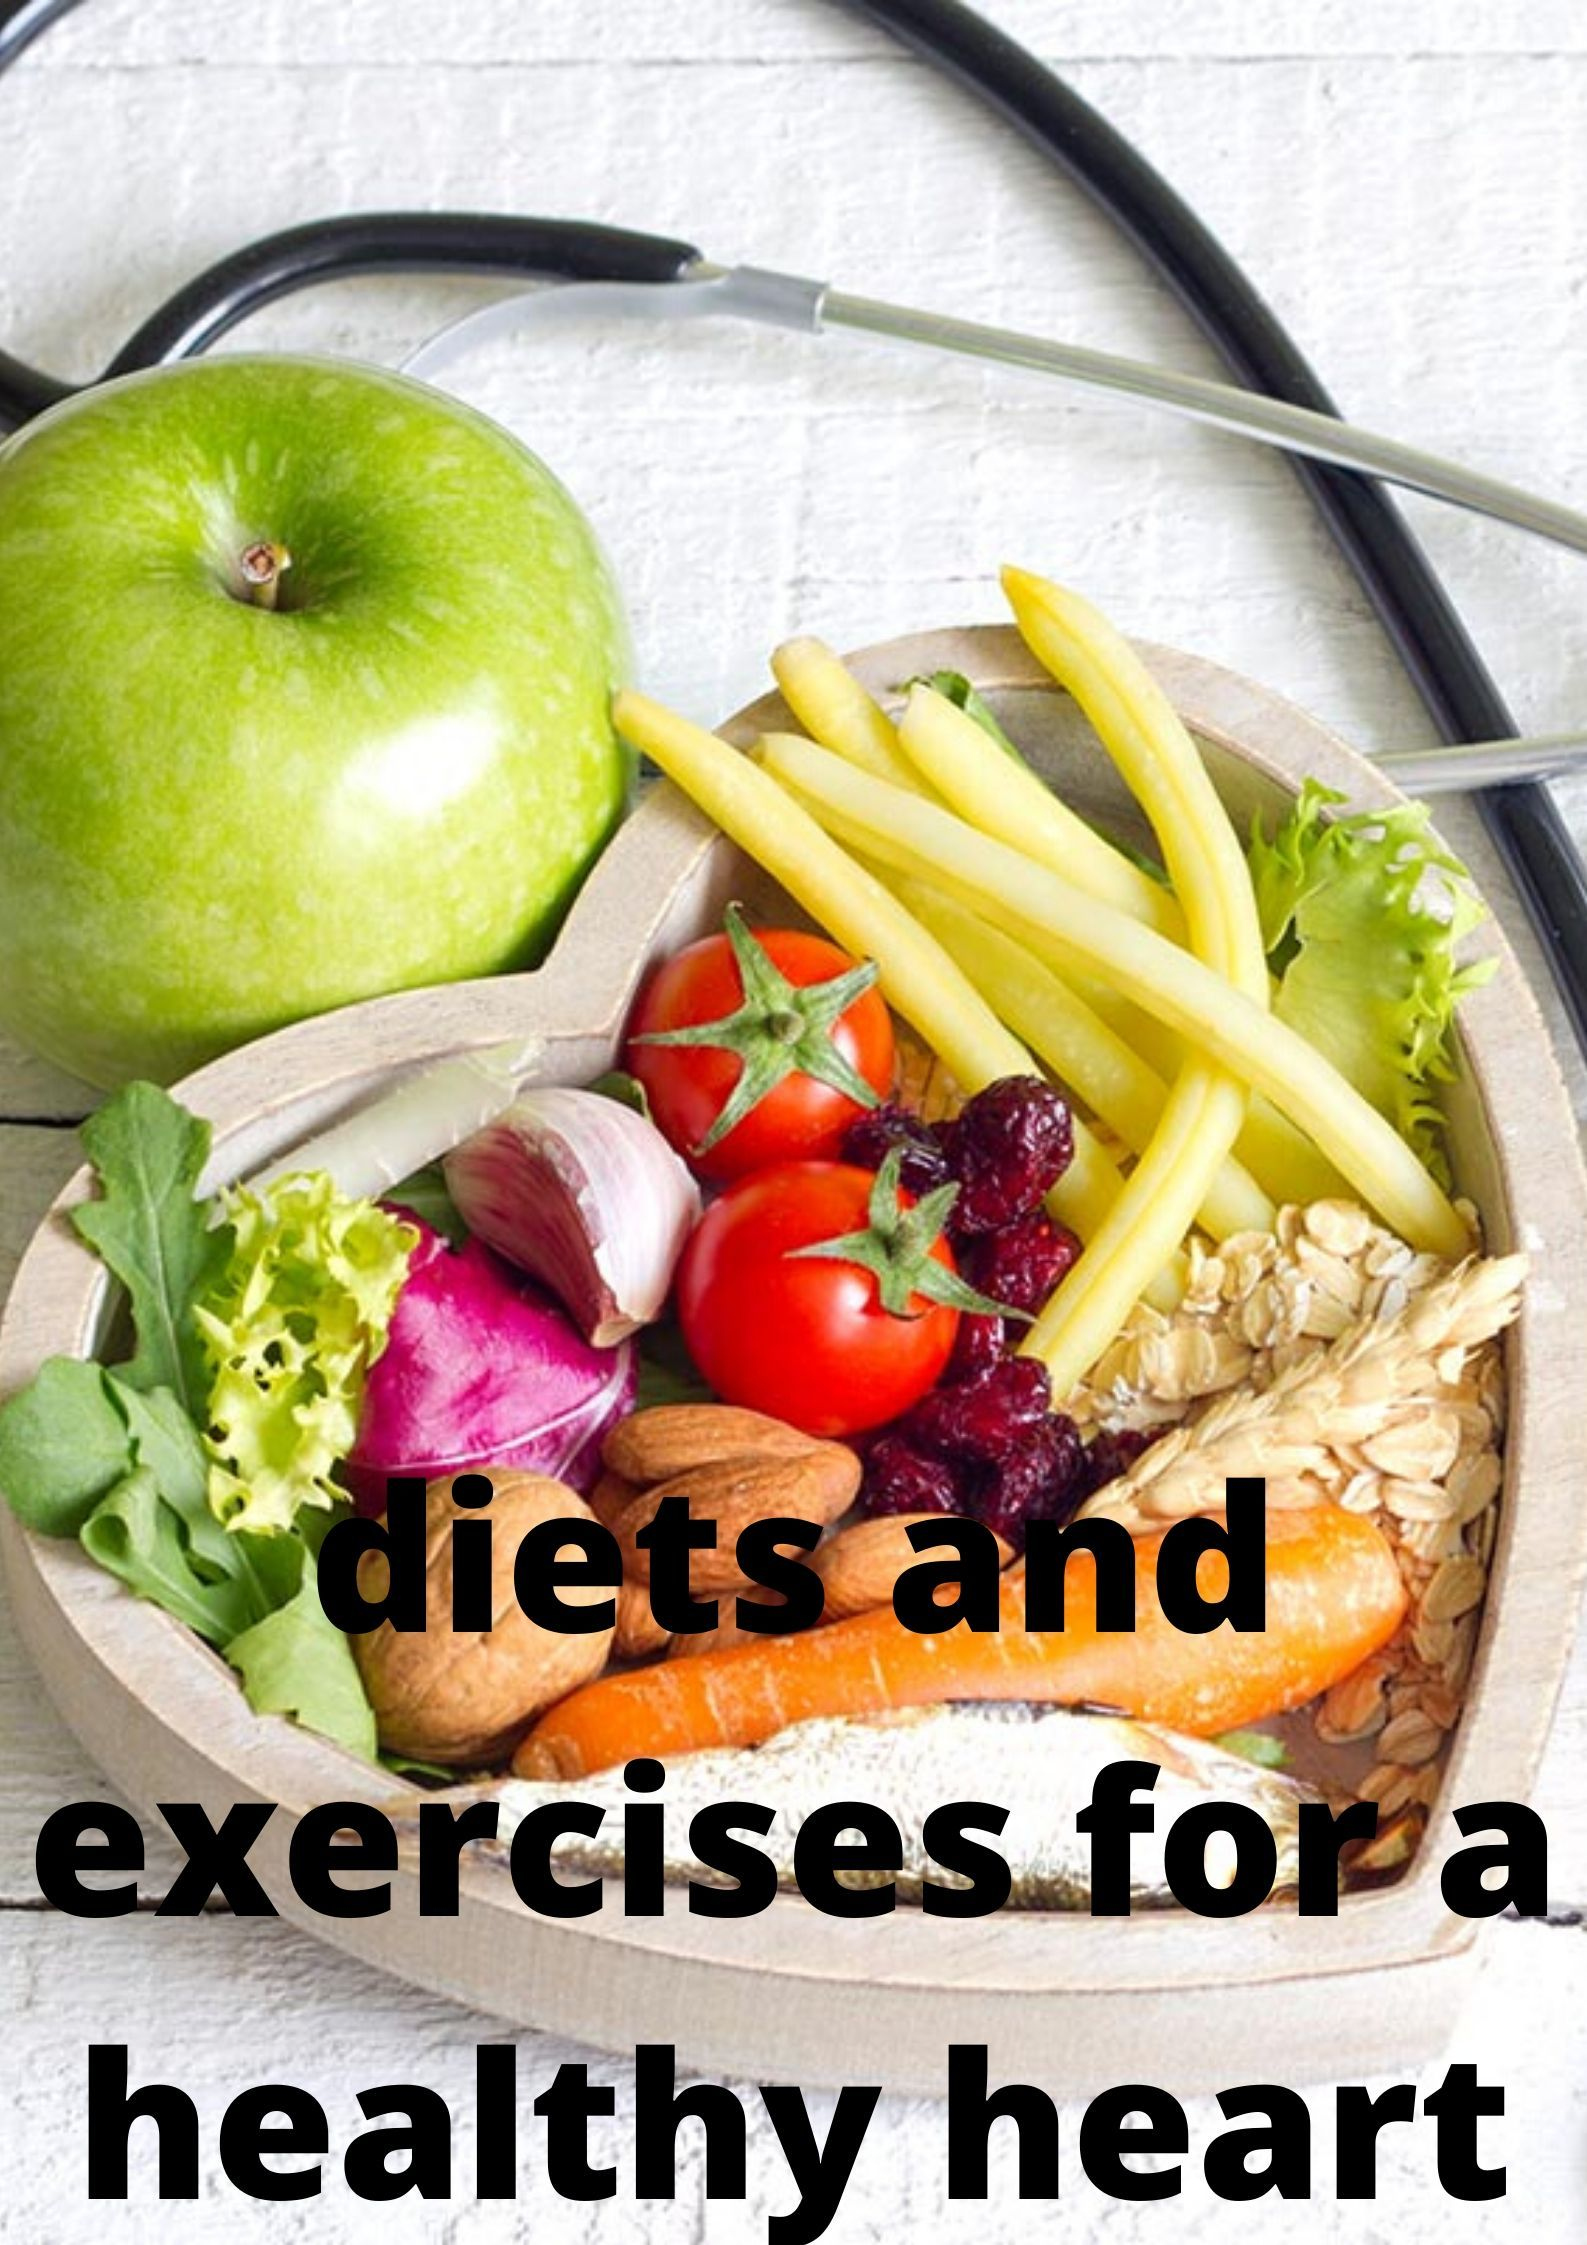 Heart Healthy Diet Book News Has Ranked 39 Diets Based On 